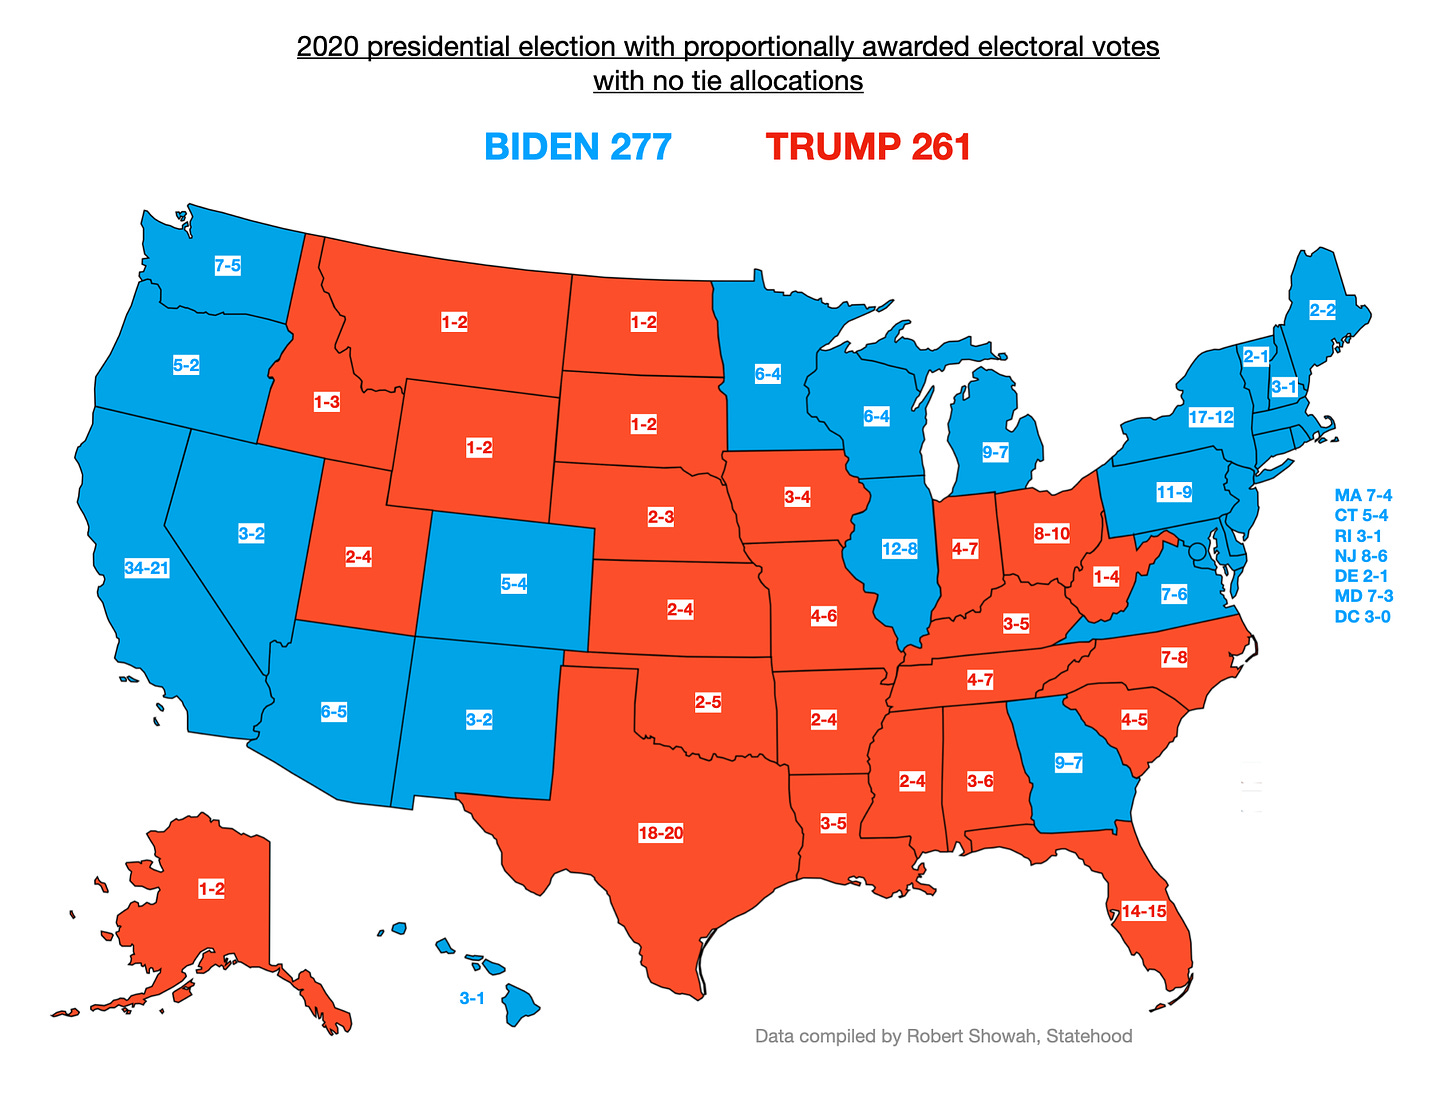 If Electoral College votes were awarded proportionally